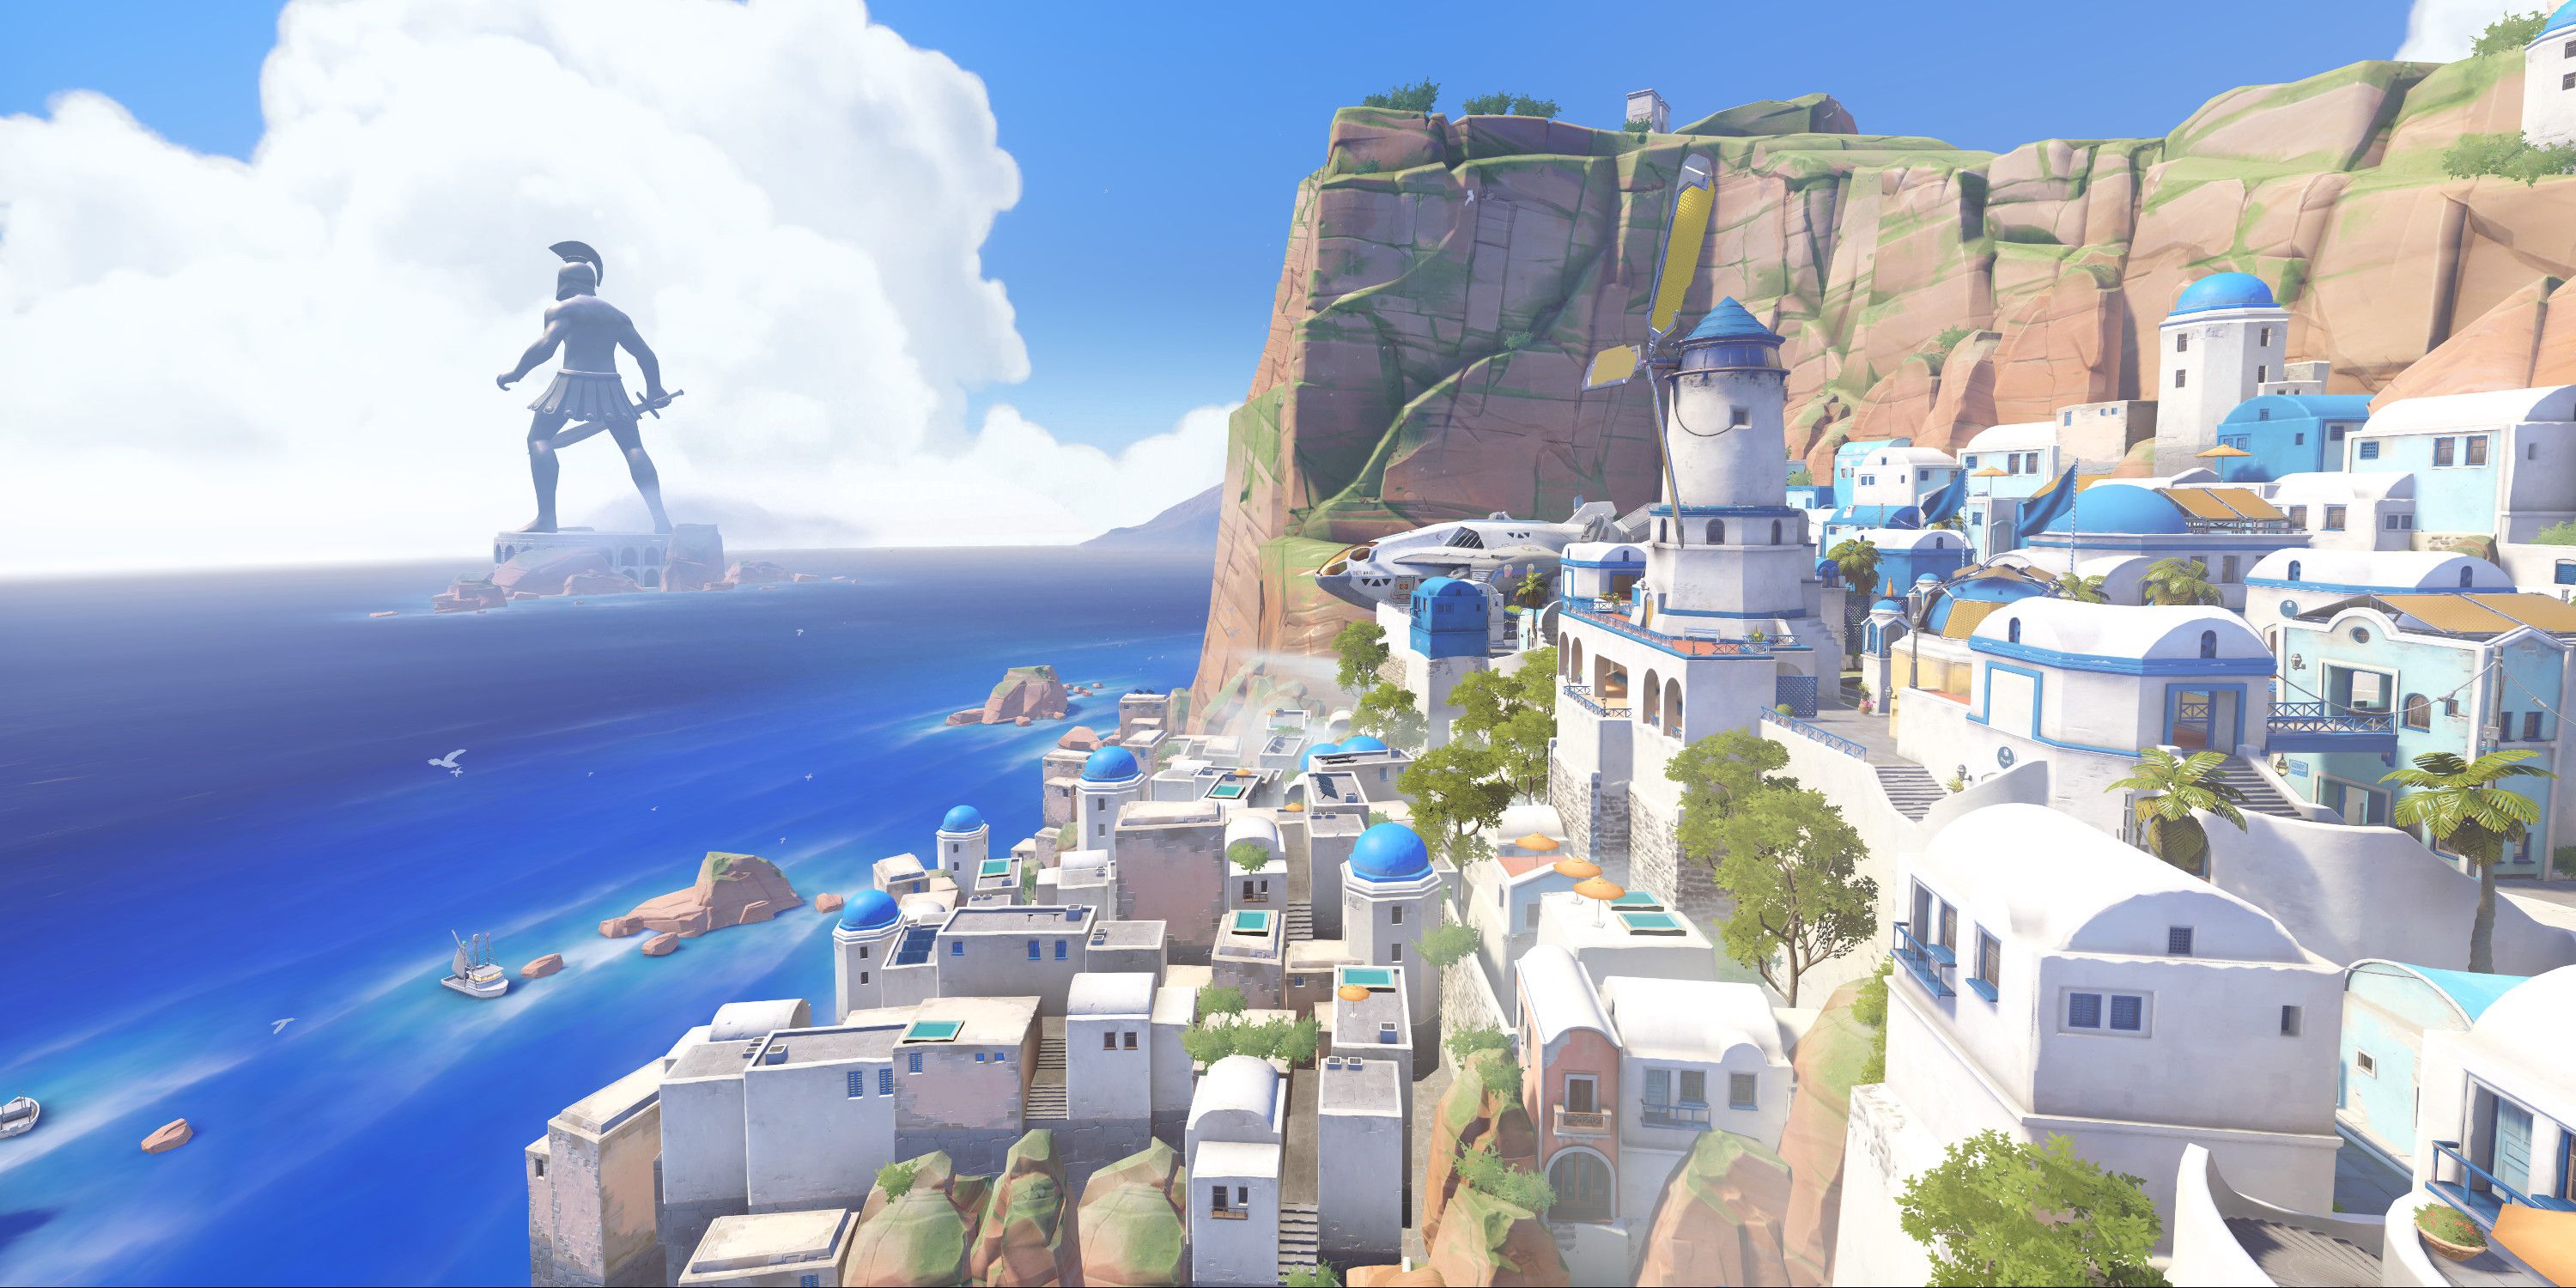 The seaside town of Ilios in Overwatch